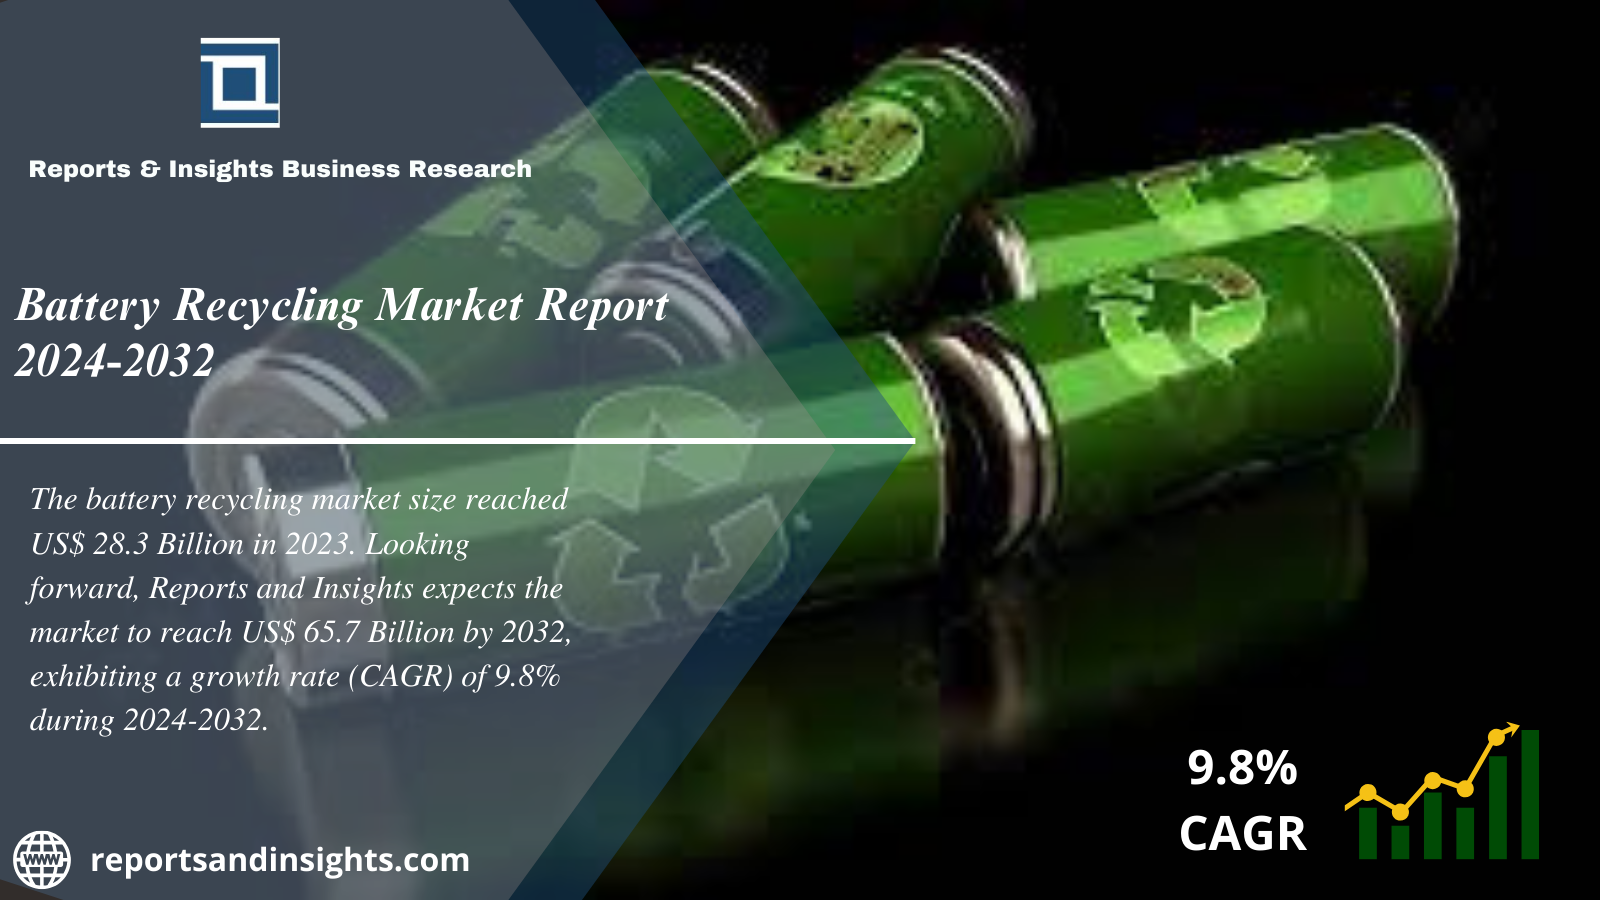 Battery Recycling Market Report 2024 to 2032: Share, Size, Growth, Trends and Industry Analysis